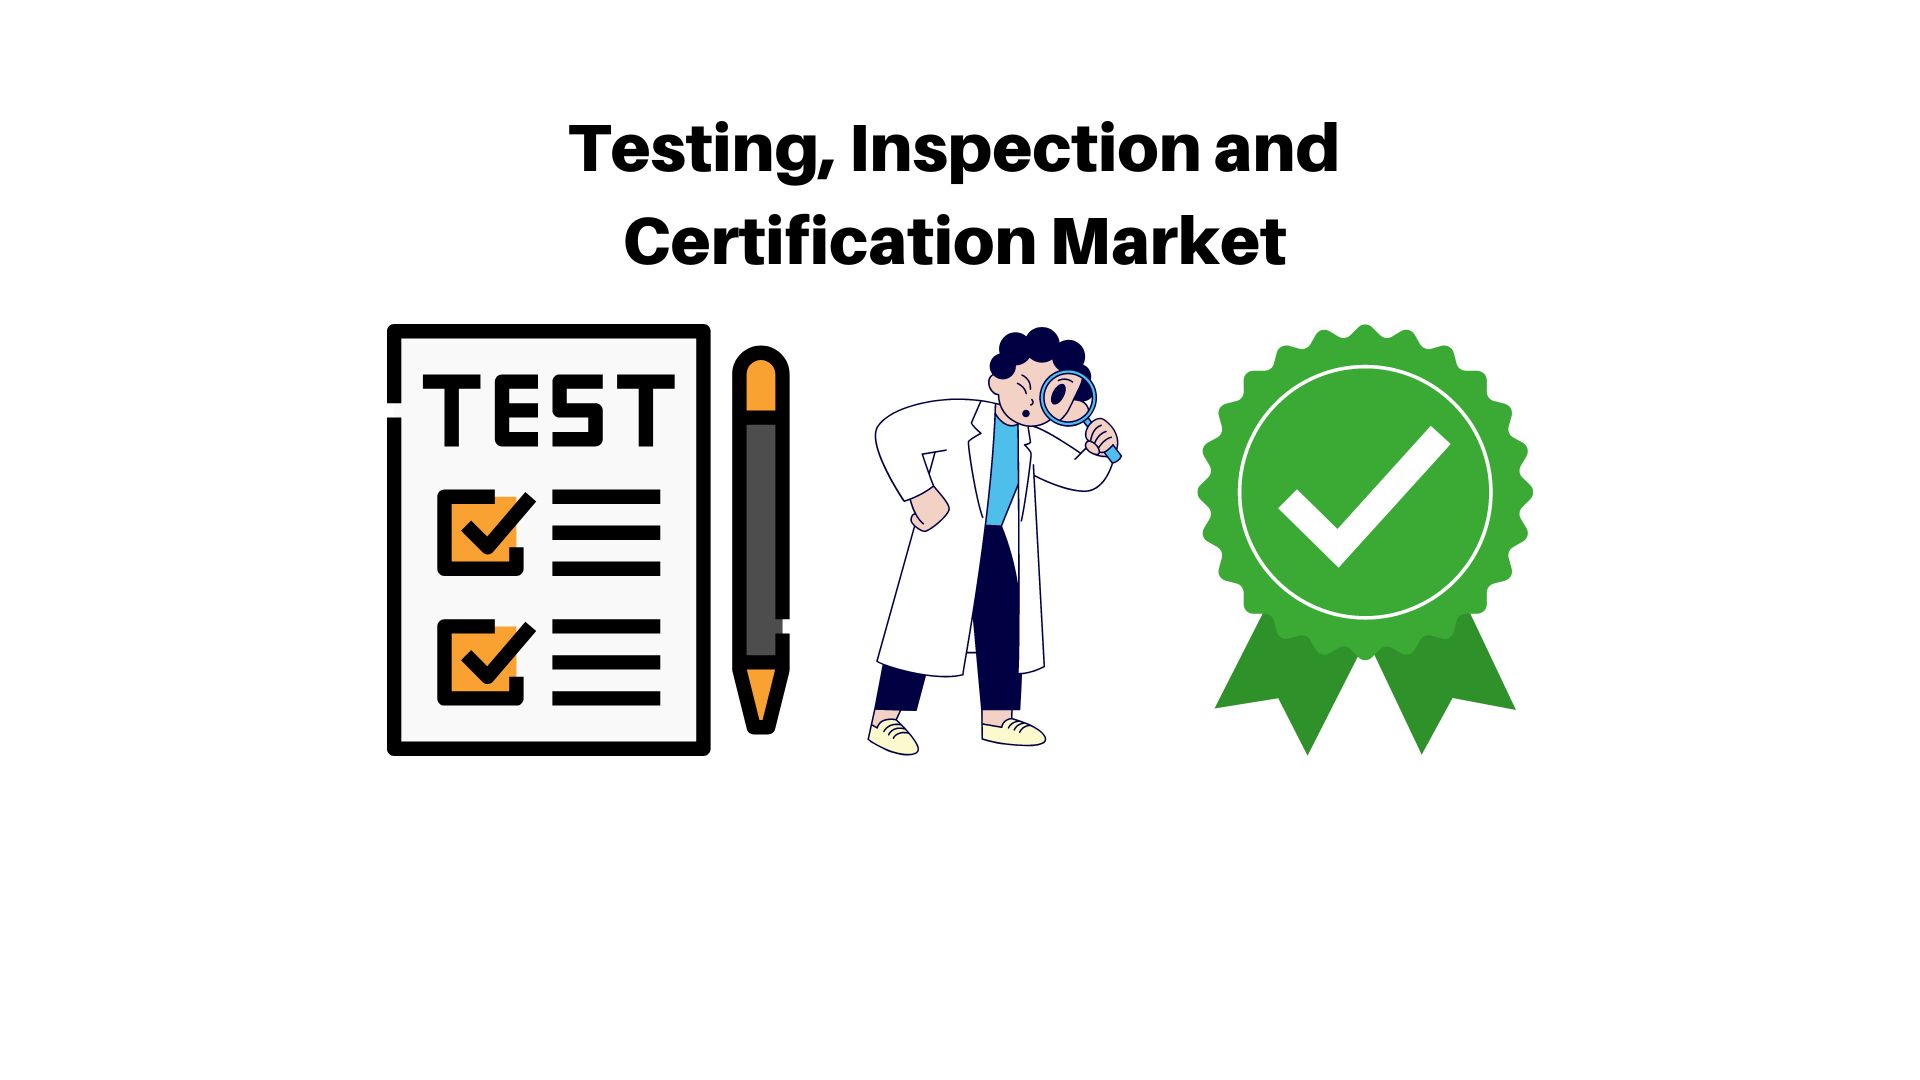 Testing, Inspection and Certification Market To Power And Cross USD 327.73 Billion By 2032